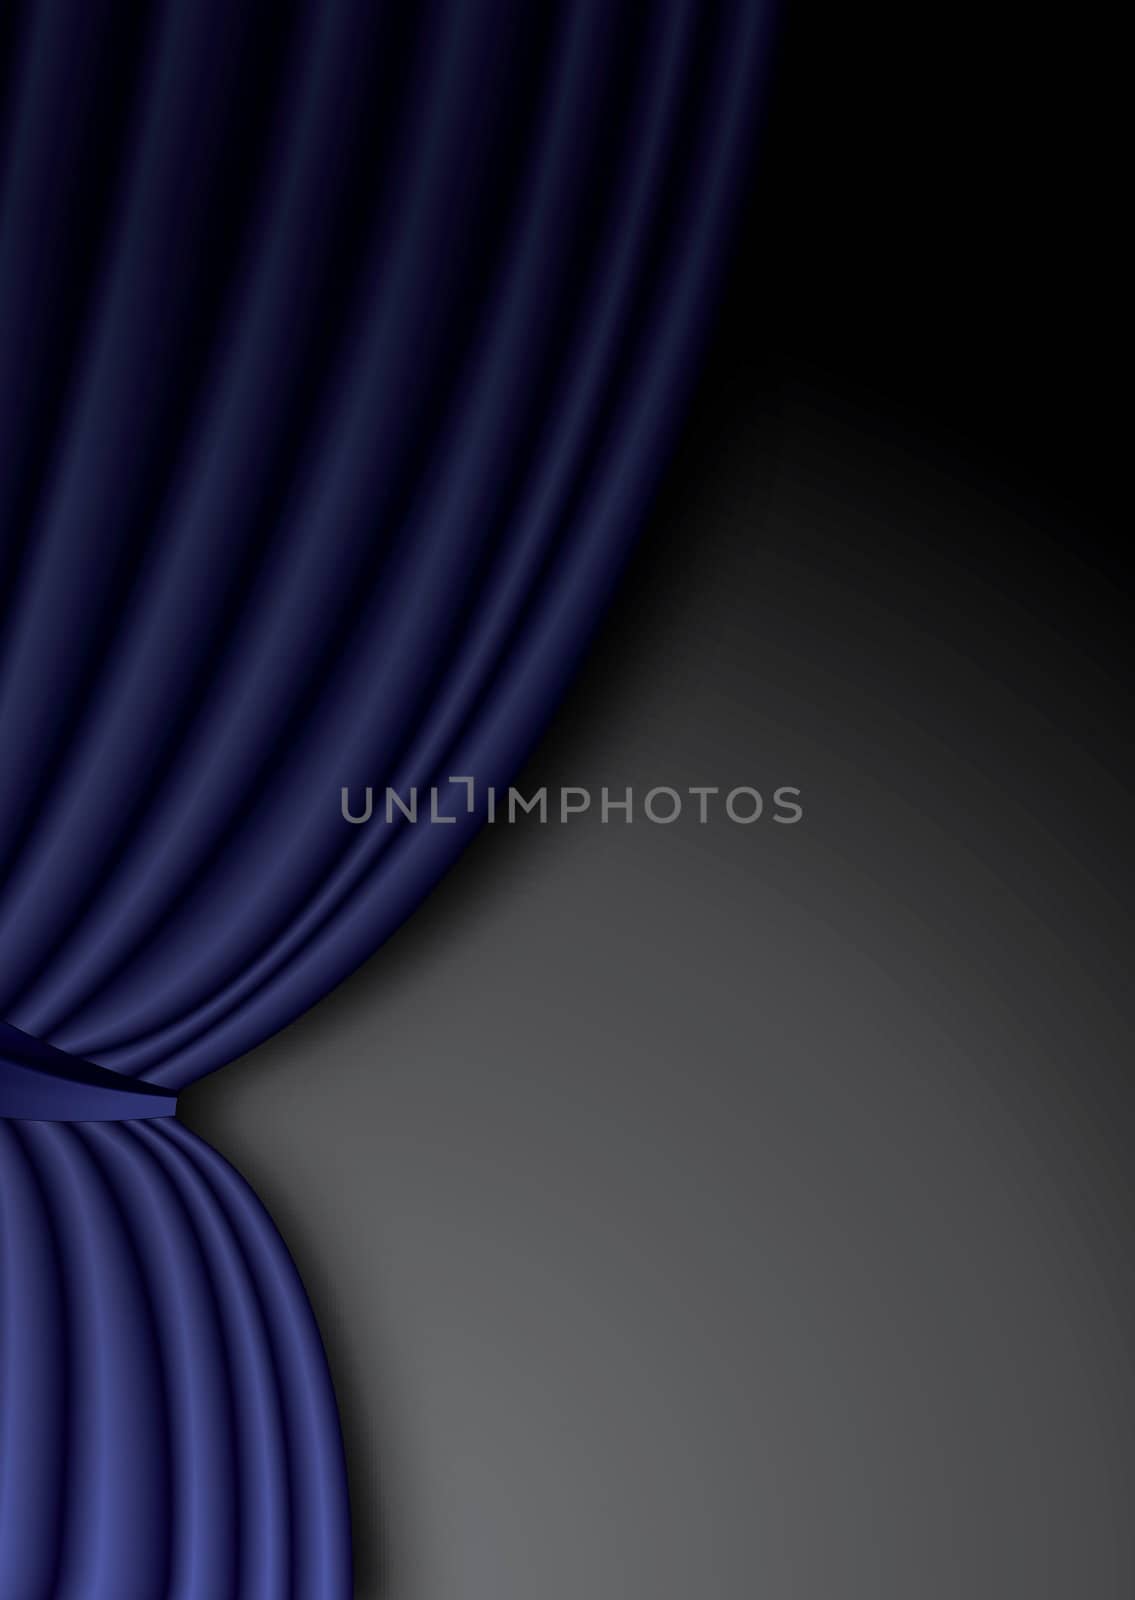 Blue theater silk curtain background with wave by svtrotof